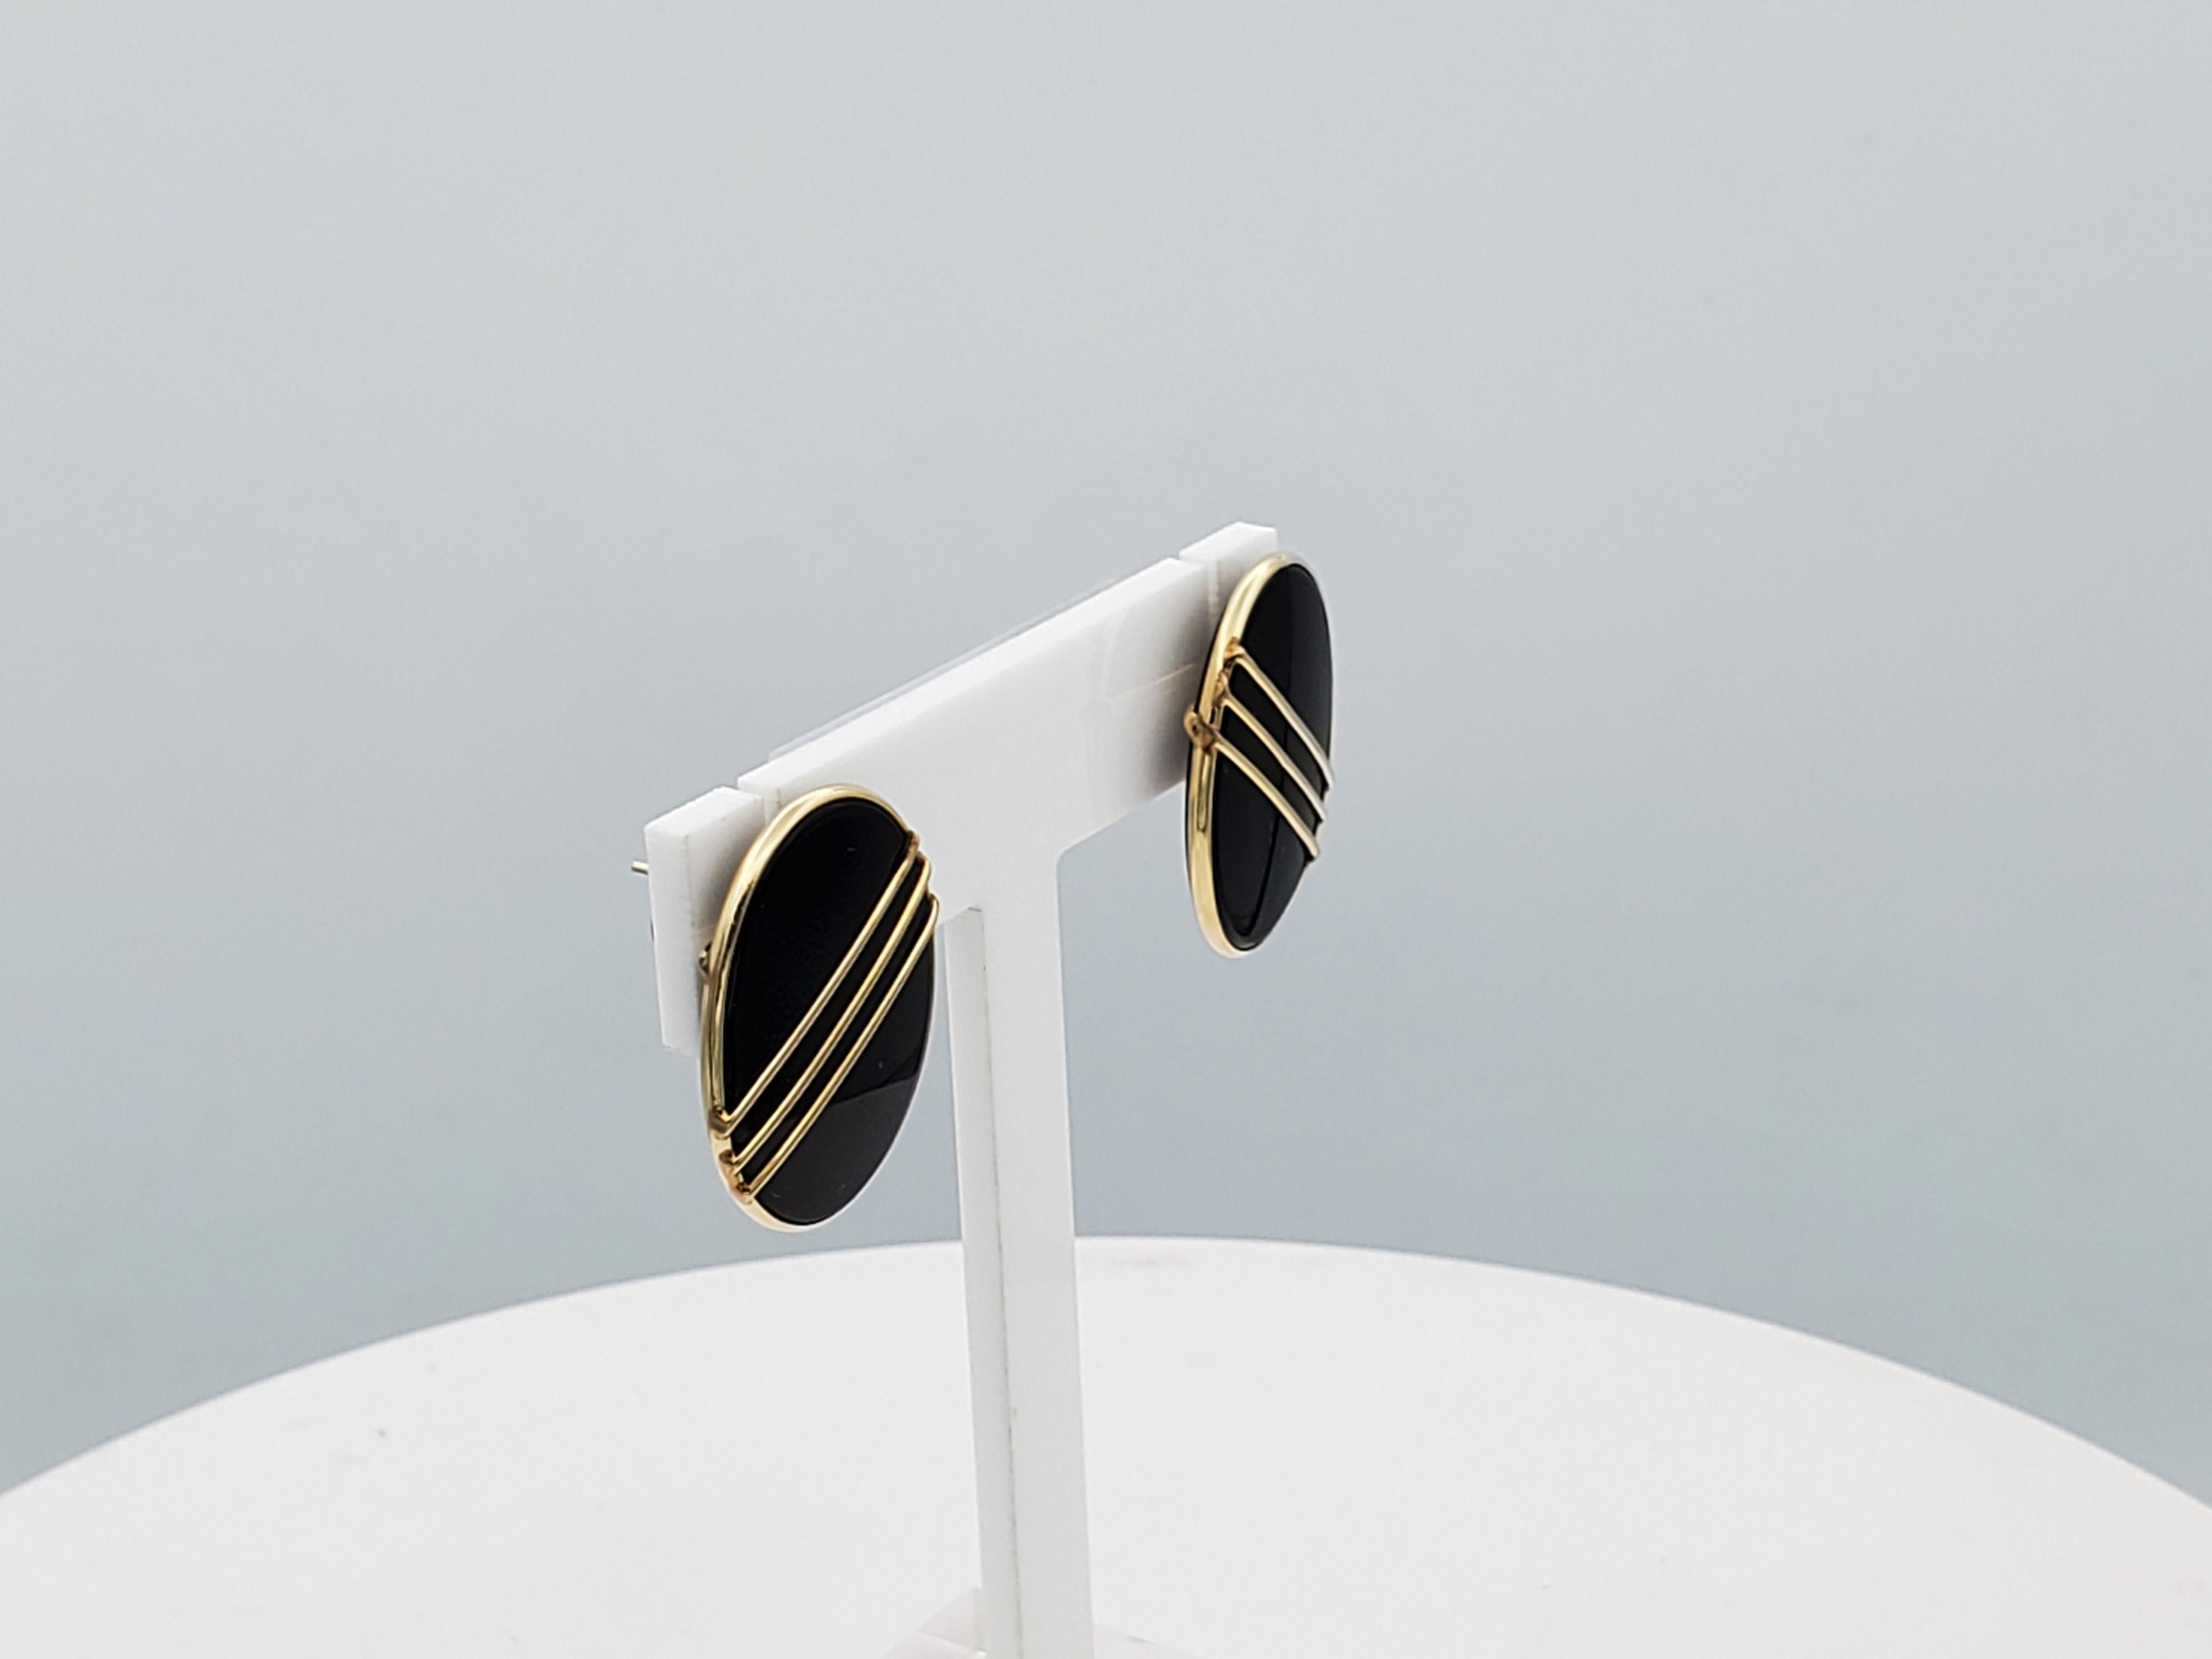 Designer Vintage 14kt Yellow Gold Friction Post Earrings with Black Onyx Inlay, Very Good Condition, 26mm x 19mm x 3.3mm, 7.3 Grams

These earrings are in beautiful condition with a classic design that's timeless. Nice addition to your jewelry